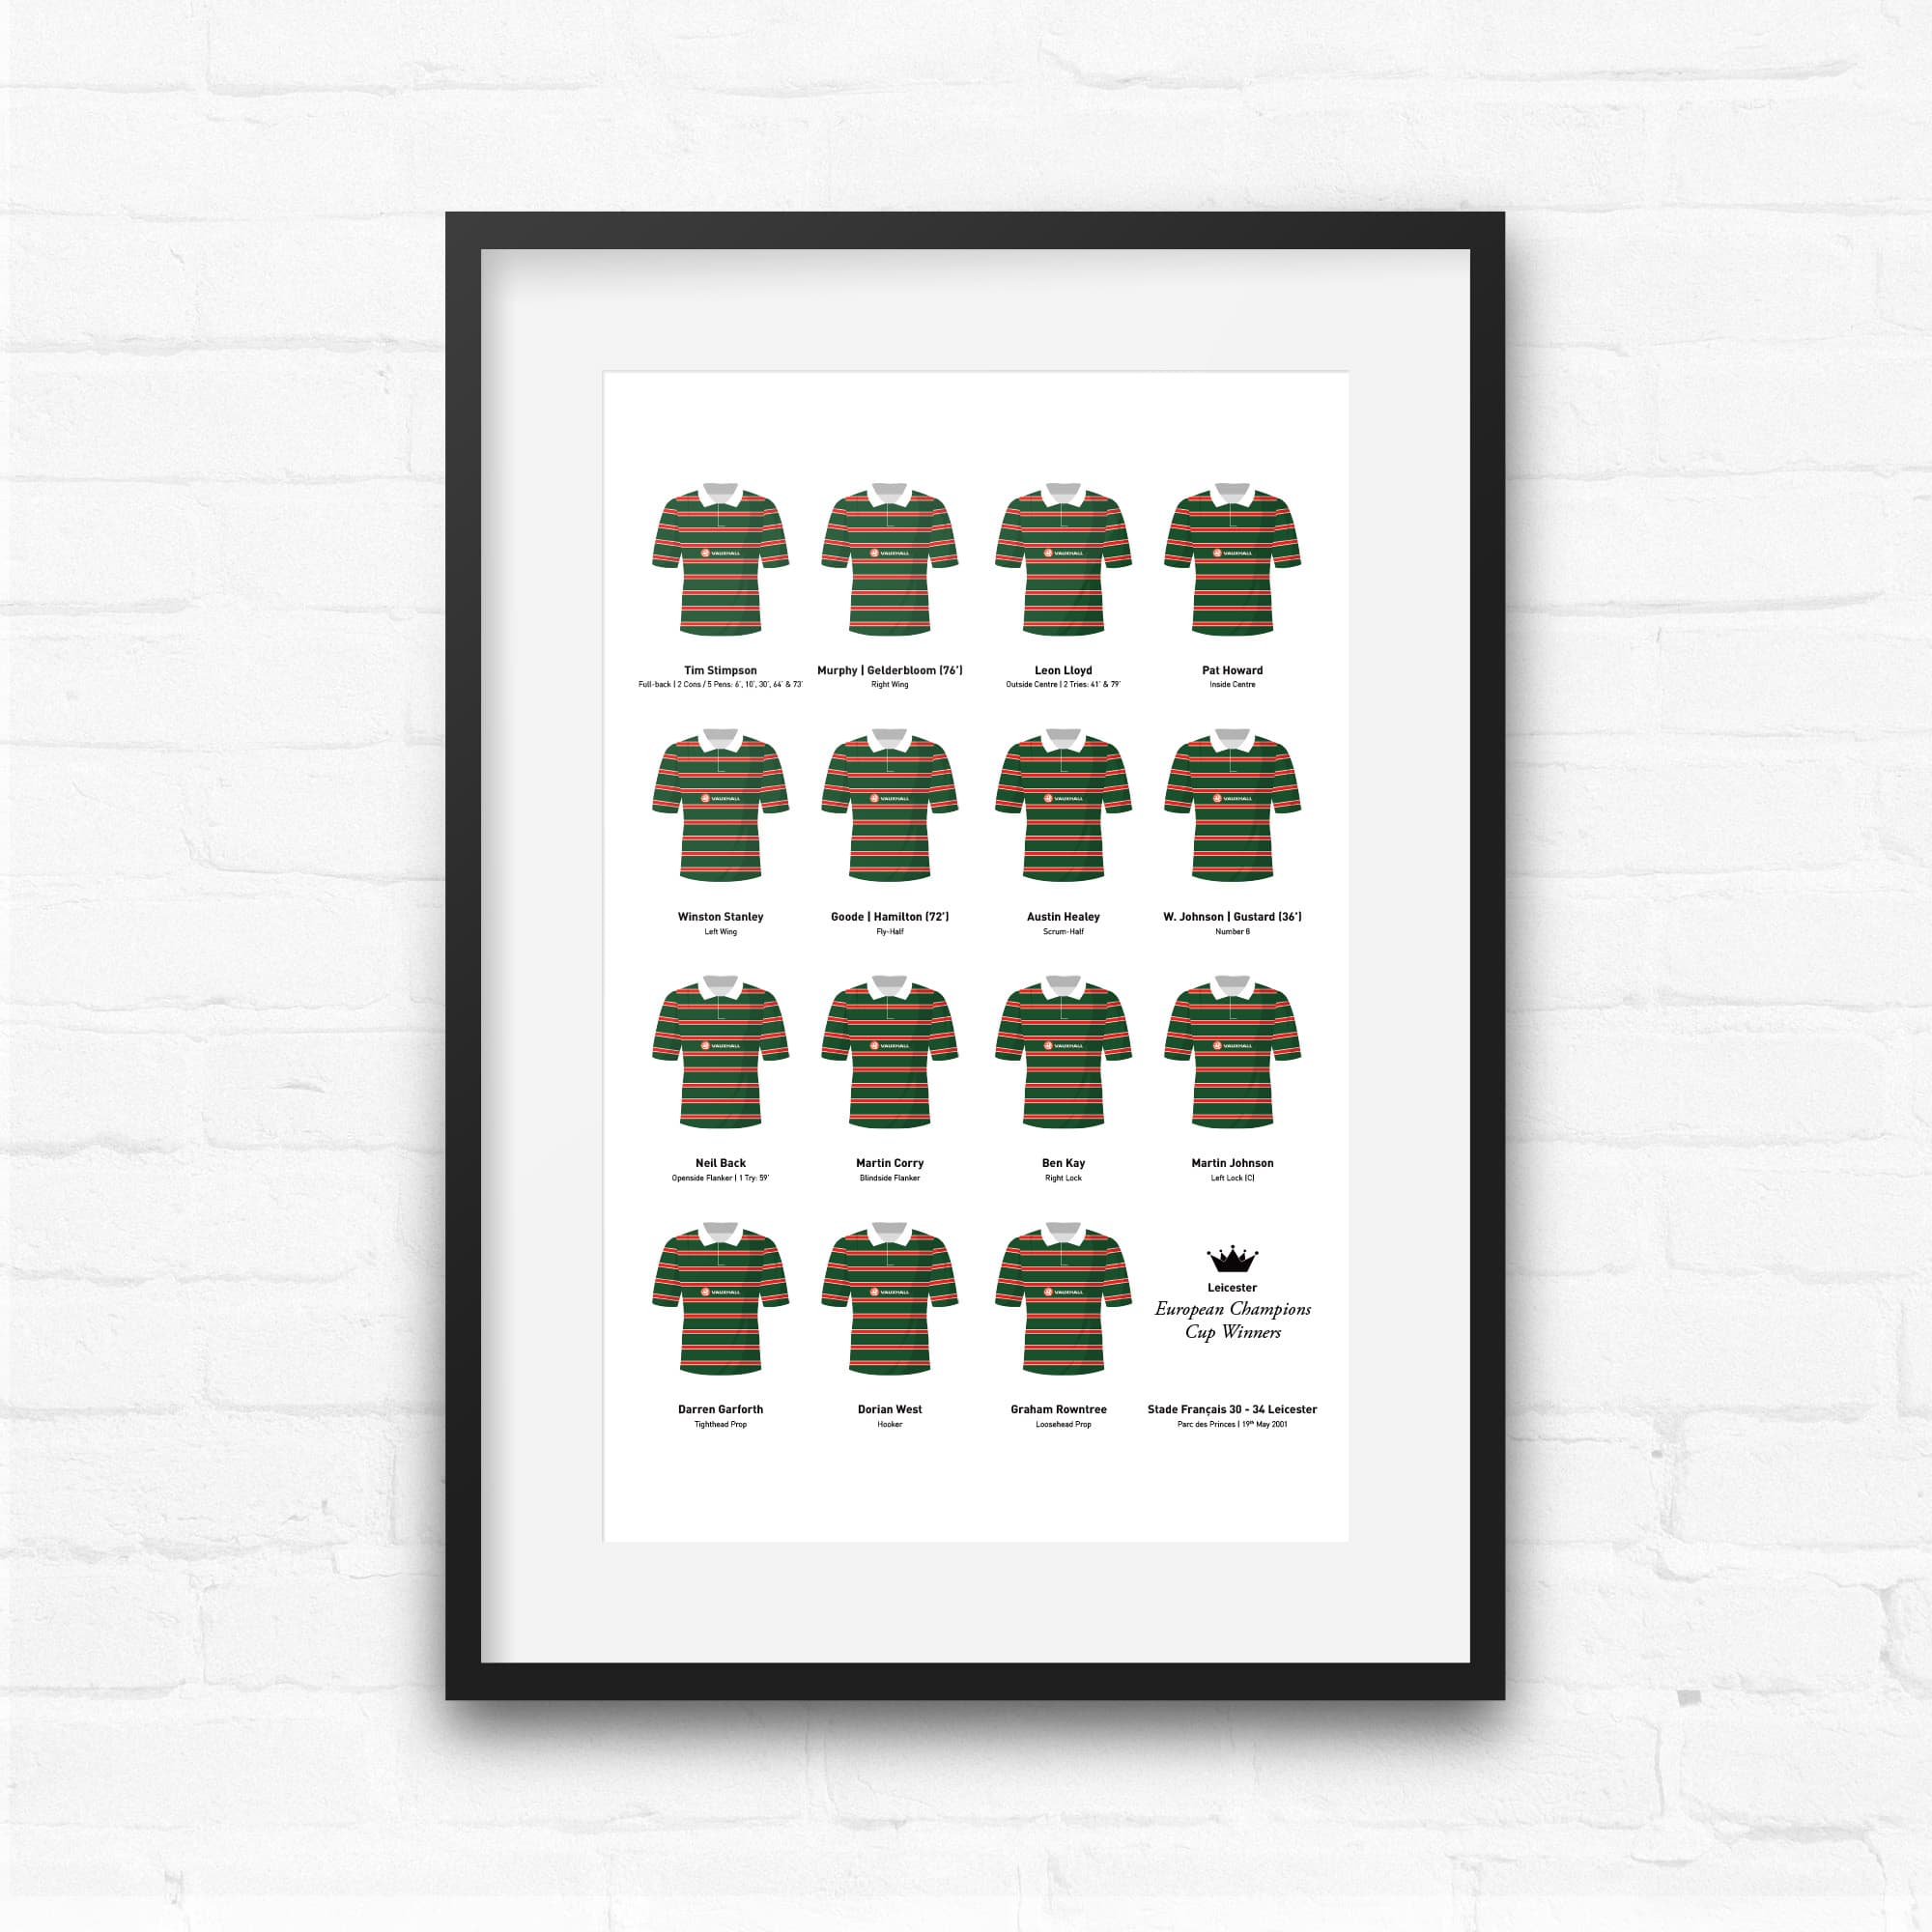 Leicester Rugby Union 2001 European Champions Cup Winners Team Print